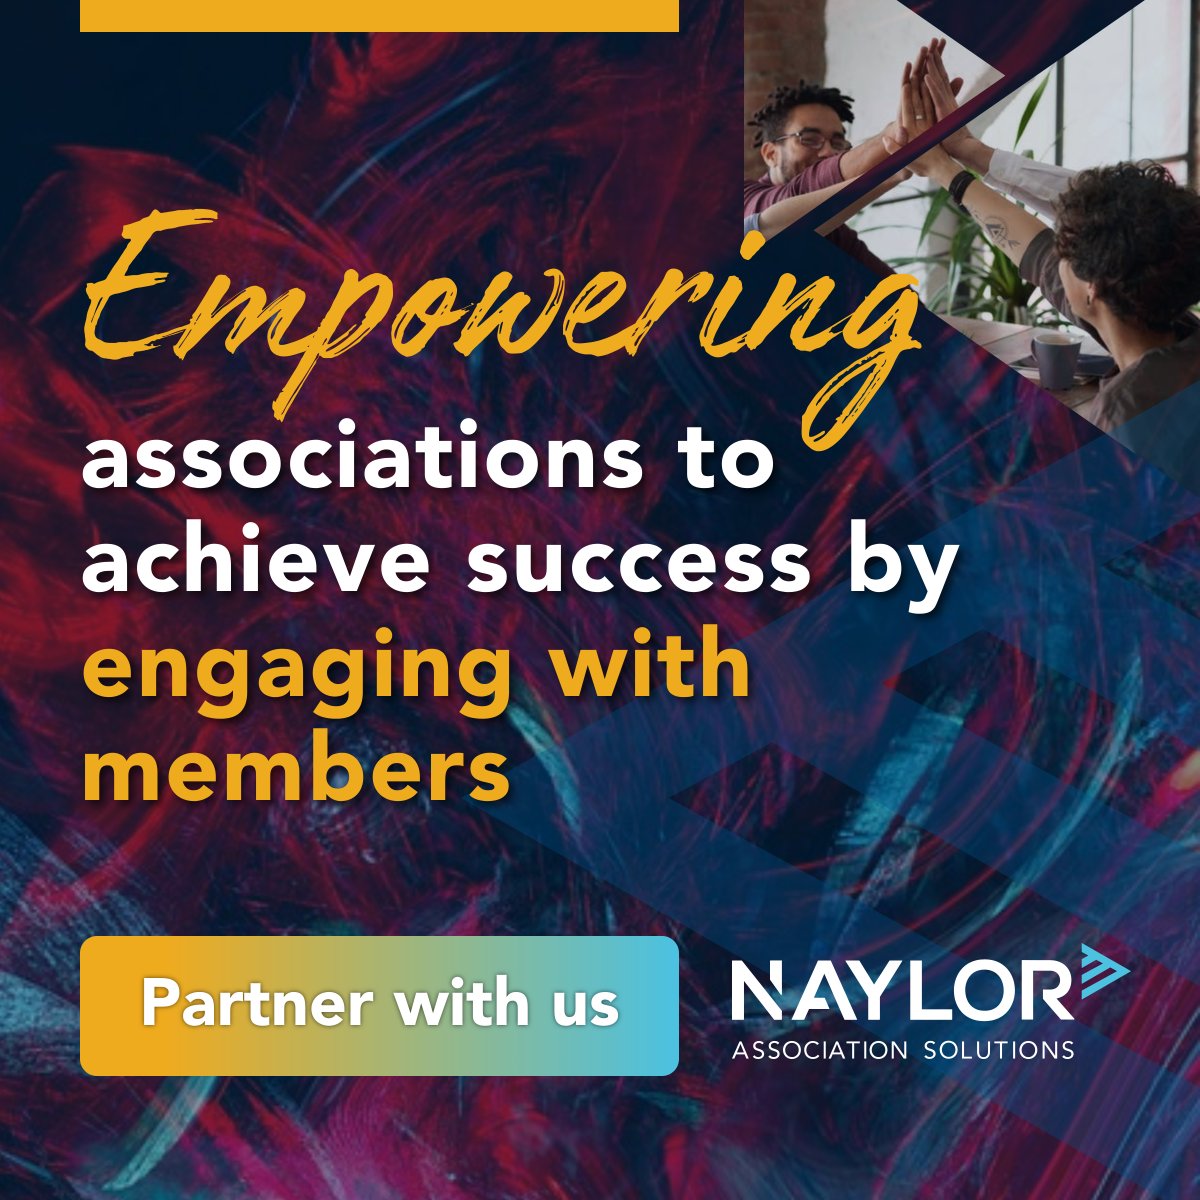 For over 50 years, Naylor has been the driving force behind thriving connections within 80+ industries. ⭐ We focus exclusively on associations, and we’re experts in member engagement strategy. 👀 Ready to revolutionize your association's engagement game? ow.ly/oAqQ50RvMwu